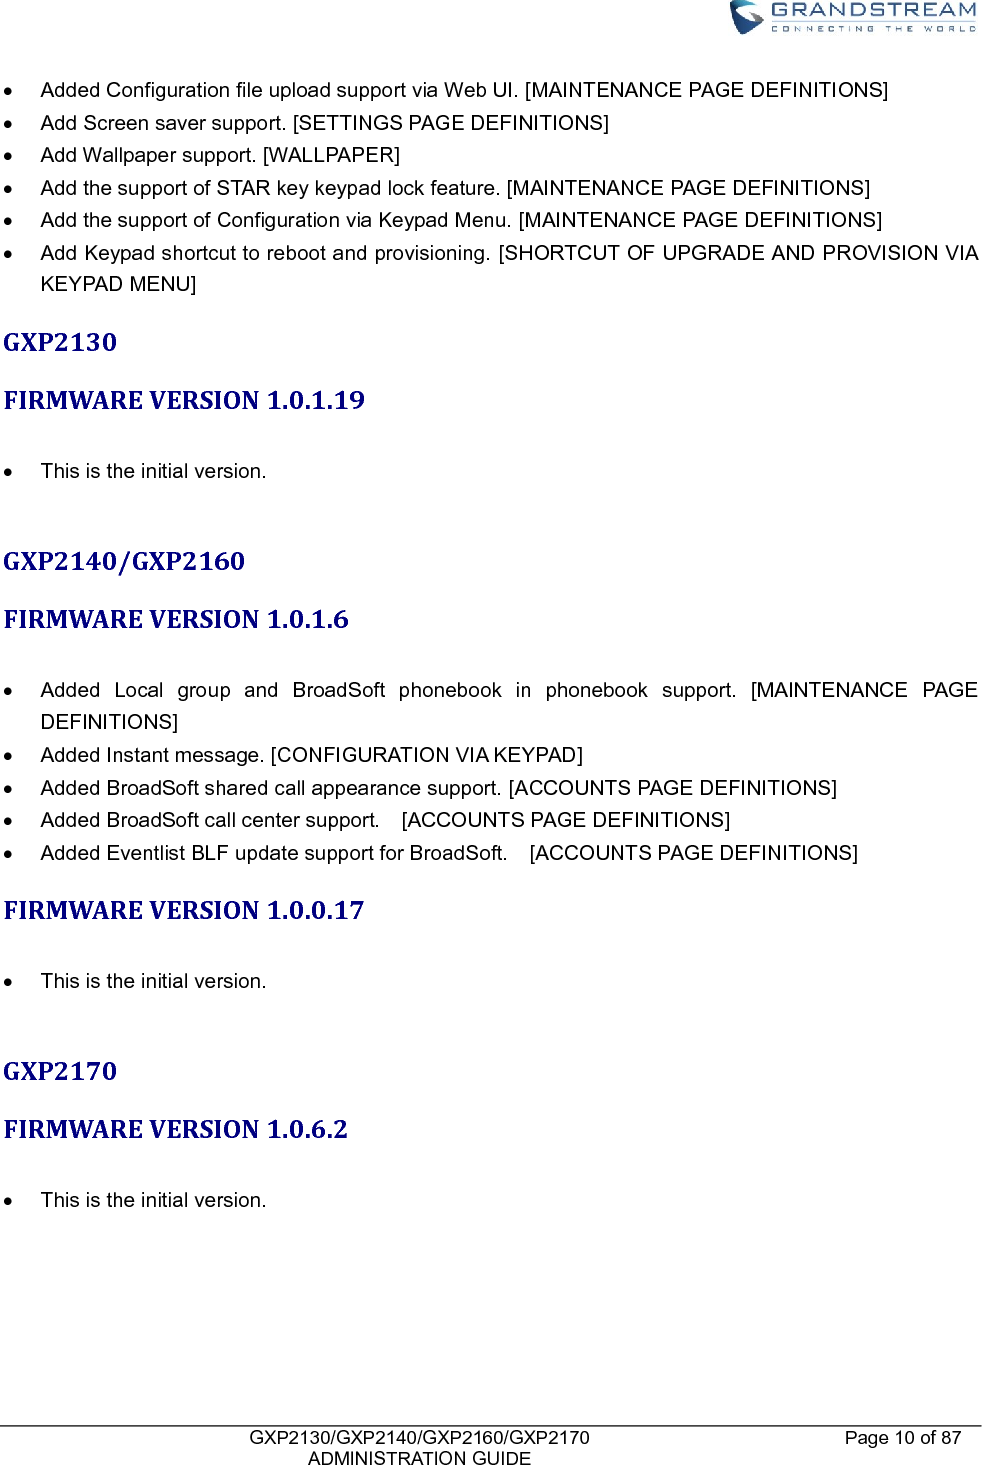    GXP2130/GXP2140/GXP2160/GXP2170   ADMINISTRATION GUIDE Page 10 of 87       Added Configuration file upload support via Web UI. [MAINTENANCE PAGE DEFINITIONS]   Add Screen saver support. [SETTINGS PAGE DEFINITIONS]   Add Wallpaper support. [WALLPAPER]     Add the support of STAR key keypad lock feature. [MAINTENANCE PAGE DEFINITIONS]   Add the support of Configuration via Keypad Menu. [MAINTENANCE PAGE DEFINITIONS]   Add Keypad shortcut to reboot and provisioning. [SHORTCUT OF UPGRADE AND PROVISION VIA KEYPAD MENU] GXP2130 FIRMWARE VERSION 1.0.1.19    This is the initial version.  GXP2140/GXP2160 FIRMWARE VERSION 1.0.1.6    Added  Local  group  and  BroadSoft  phonebook  in  phonebook  support.  [MAINTENANCE  PAGE DEFINITIONS]   Added Instant message. [CONFIGURATION VIA KEYPAD]   Added BroadSoft shared call appearance support. [ACCOUNTS PAGE DEFINITIONS]   Added BroadSoft call center support.    [ACCOUNTS PAGE DEFINITIONS]   Added Eventlist BLF update support for BroadSoft.    [ACCOUNTS PAGE DEFINITIONS] FIRMWARE VERSION 1.0.0.17    This is the initial version.  GXP2170 FIRMWARE VERSION 1.0.6.2    This is the initial version.  